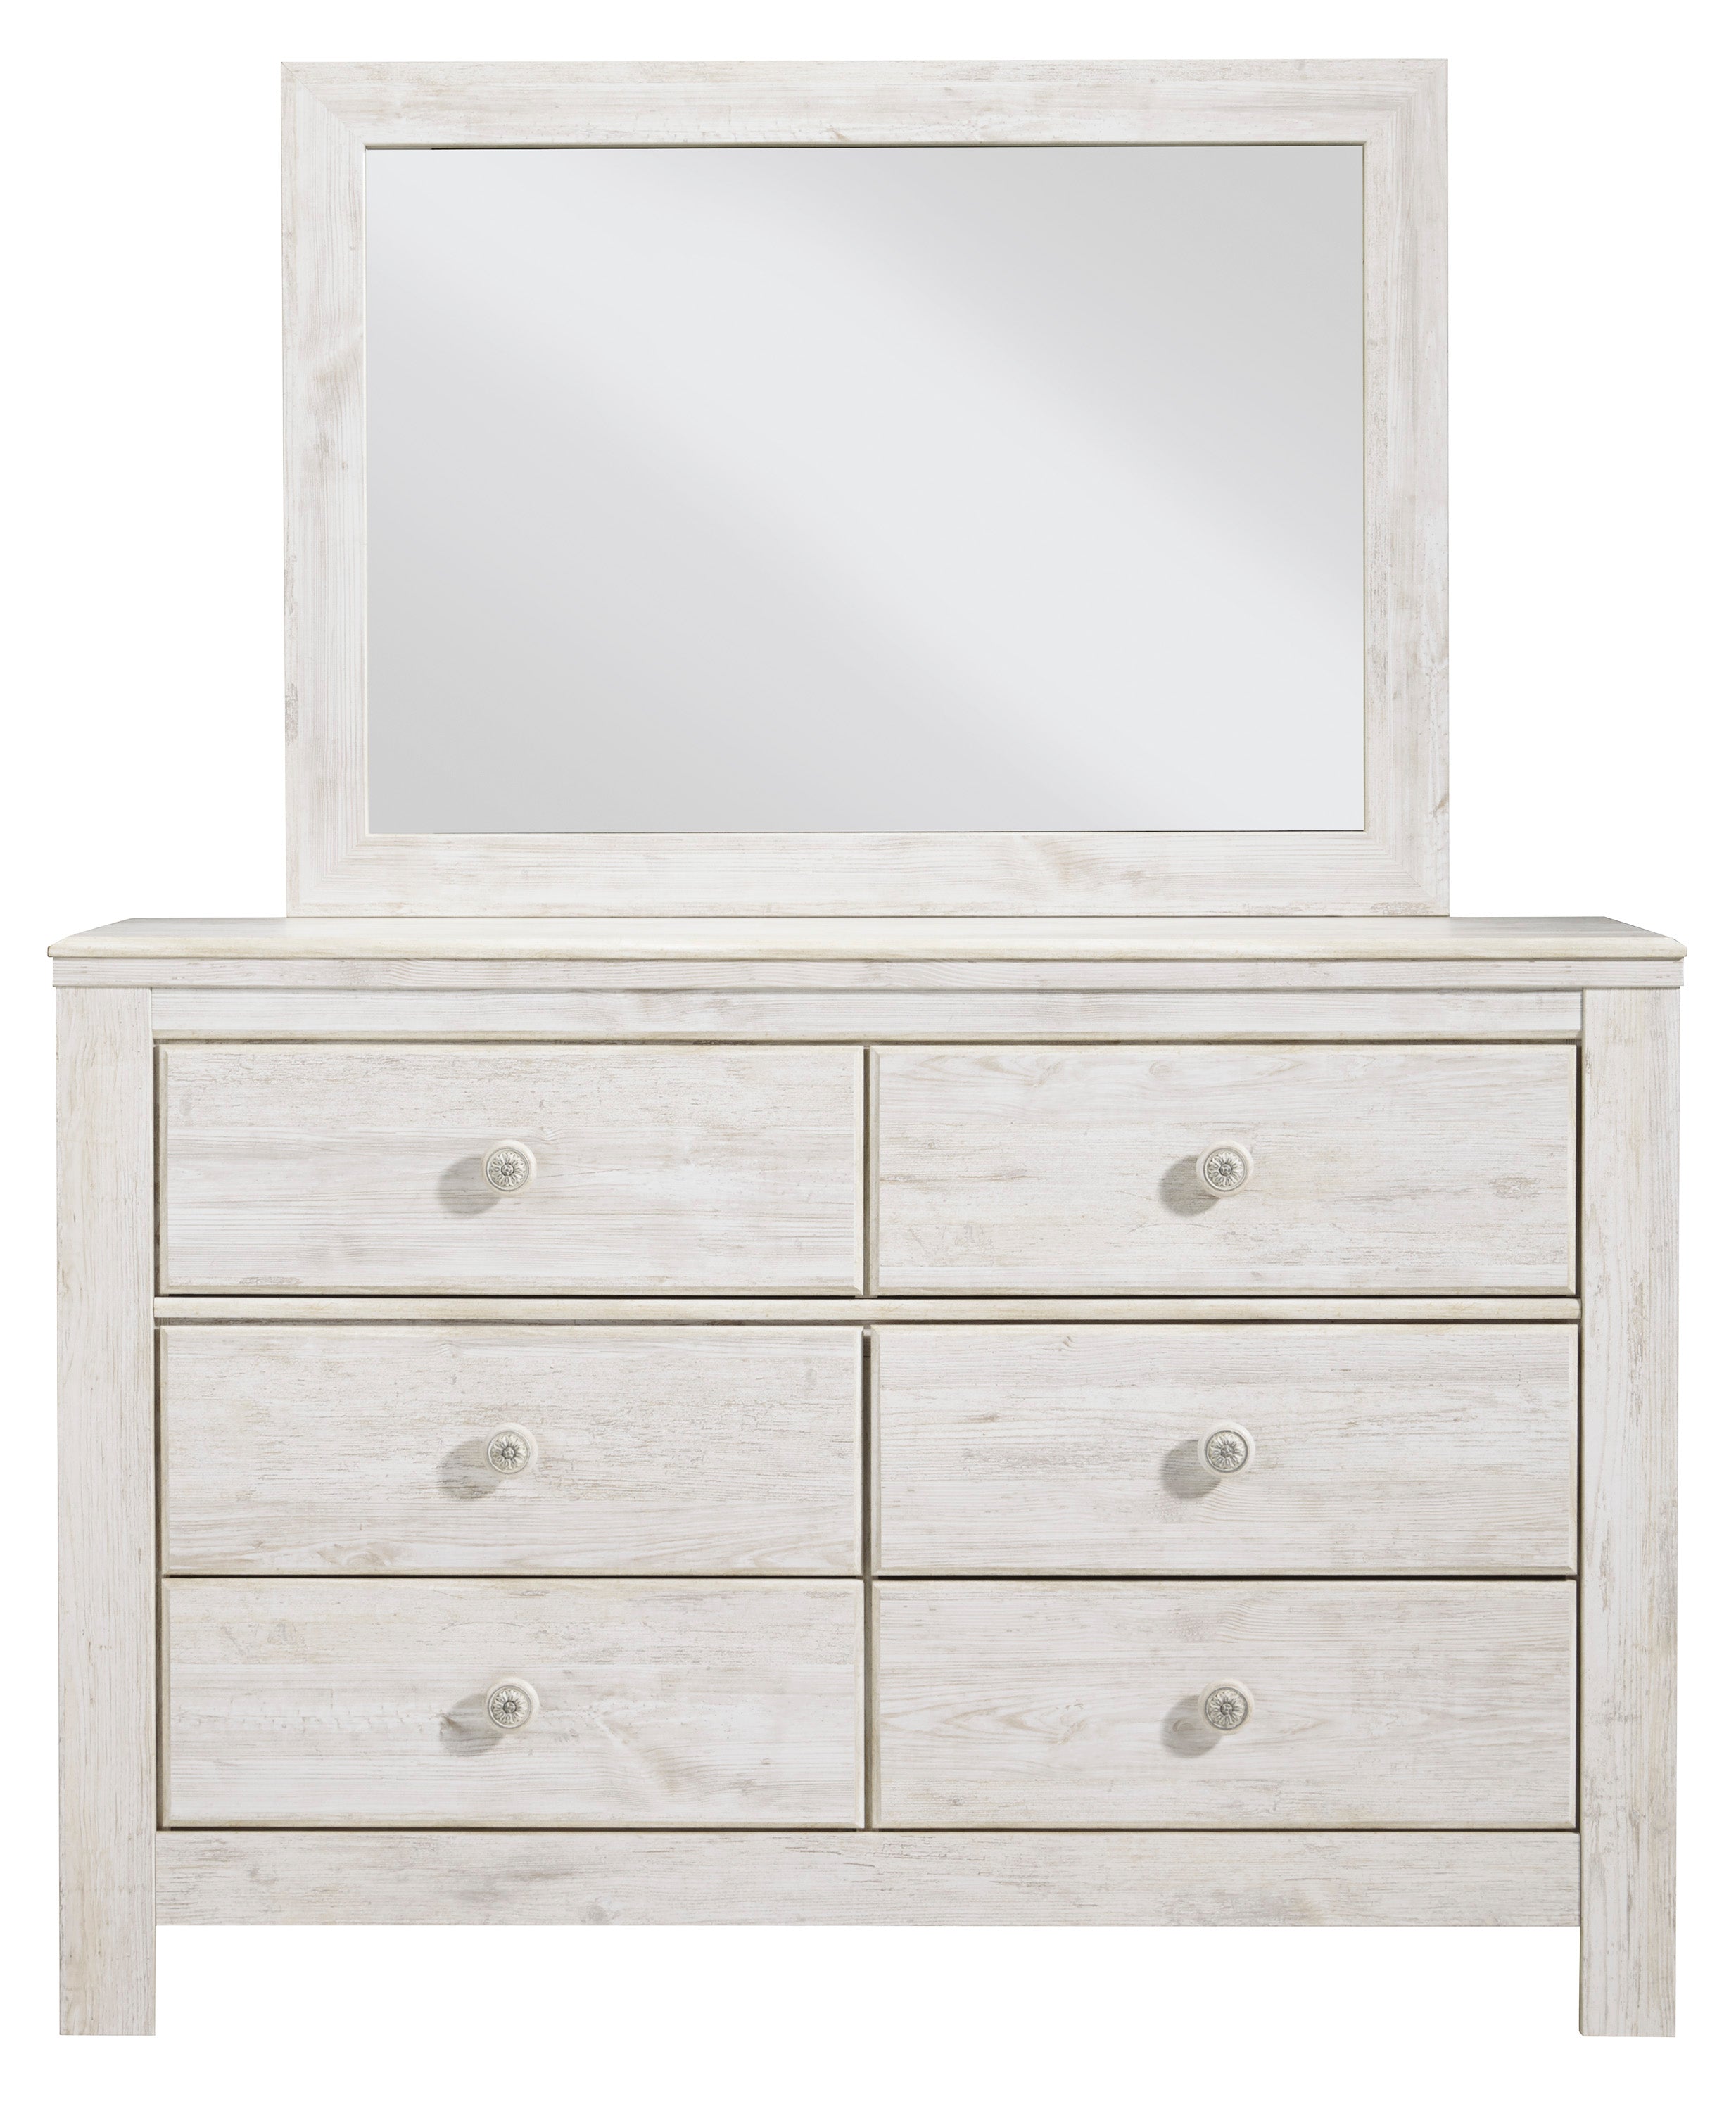 Paxberry Twin Panel Bed with Mirrored Dresser